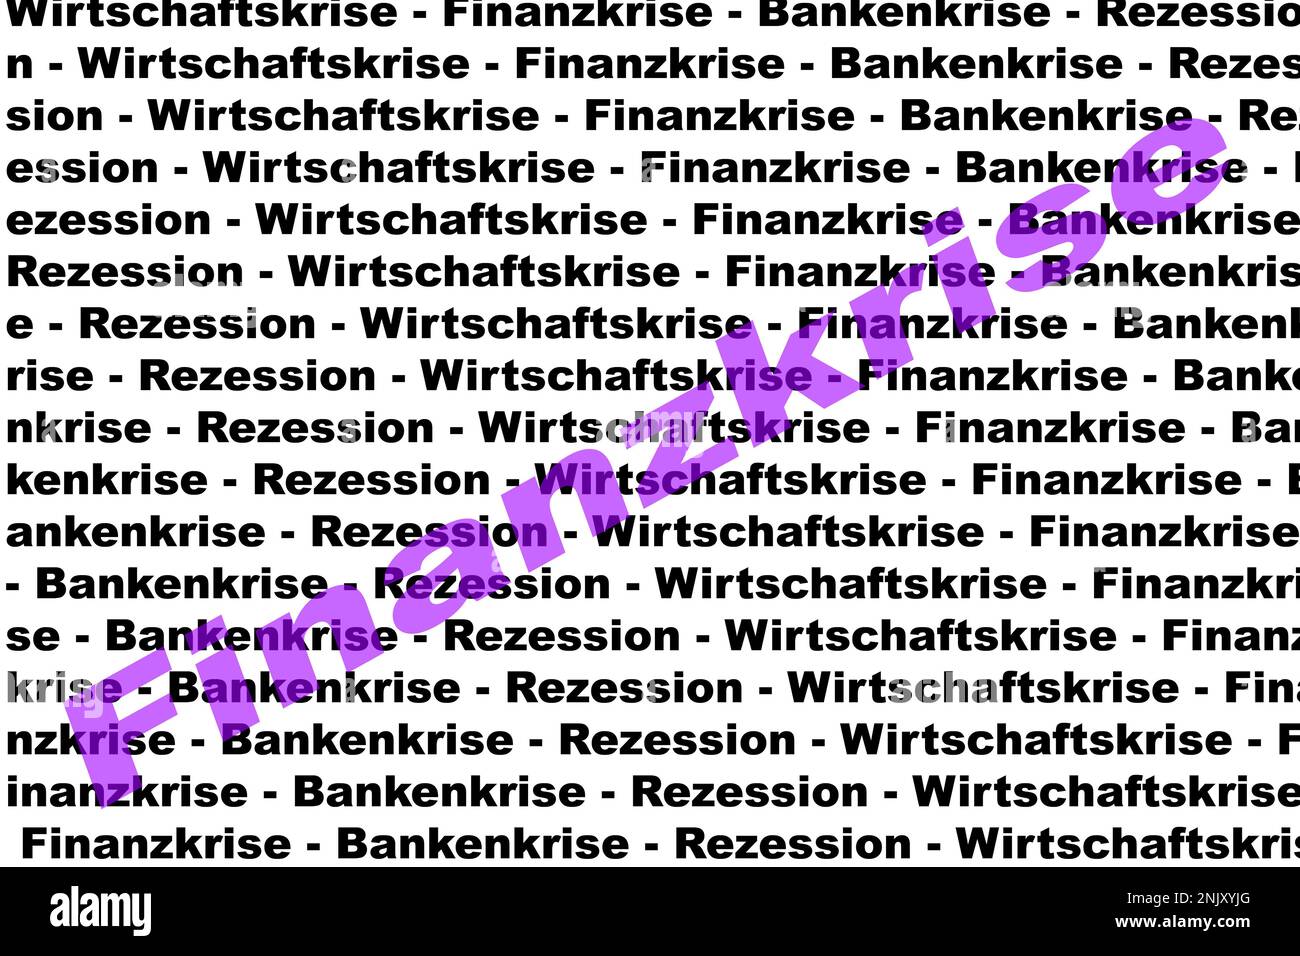 different crisis words, elevated Finanzkrise, financial crisis Stock Photo